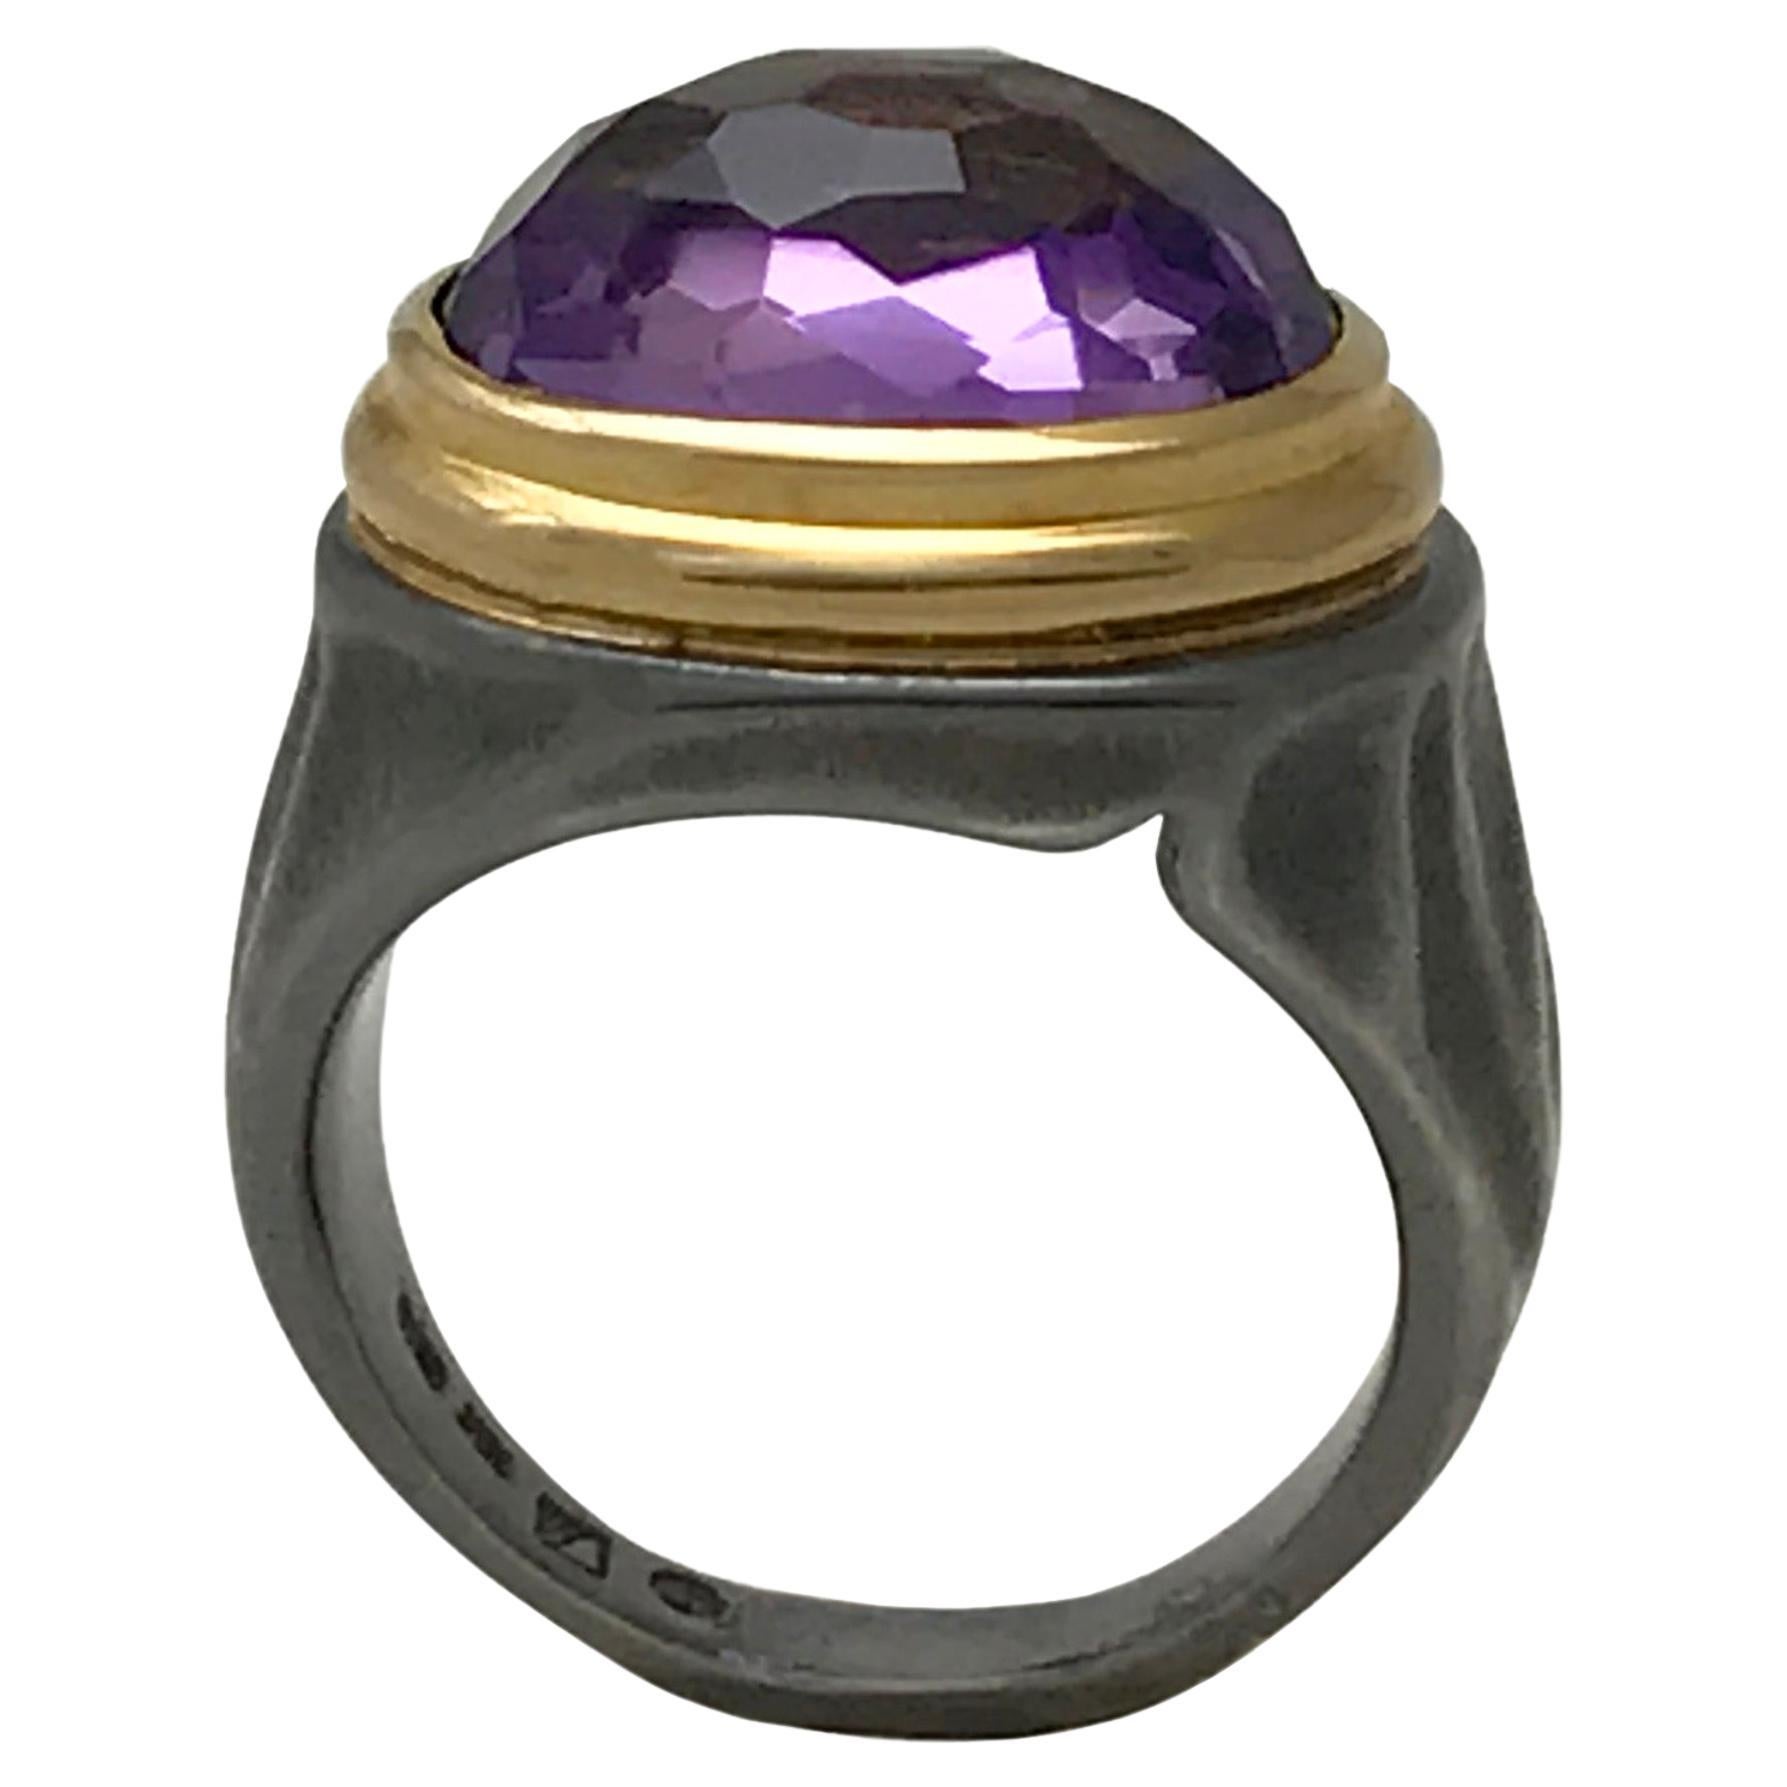 K.Mita Oxidized Sterling Silver Ring Faceted Amethyst in 18 Karat Yellow Gold